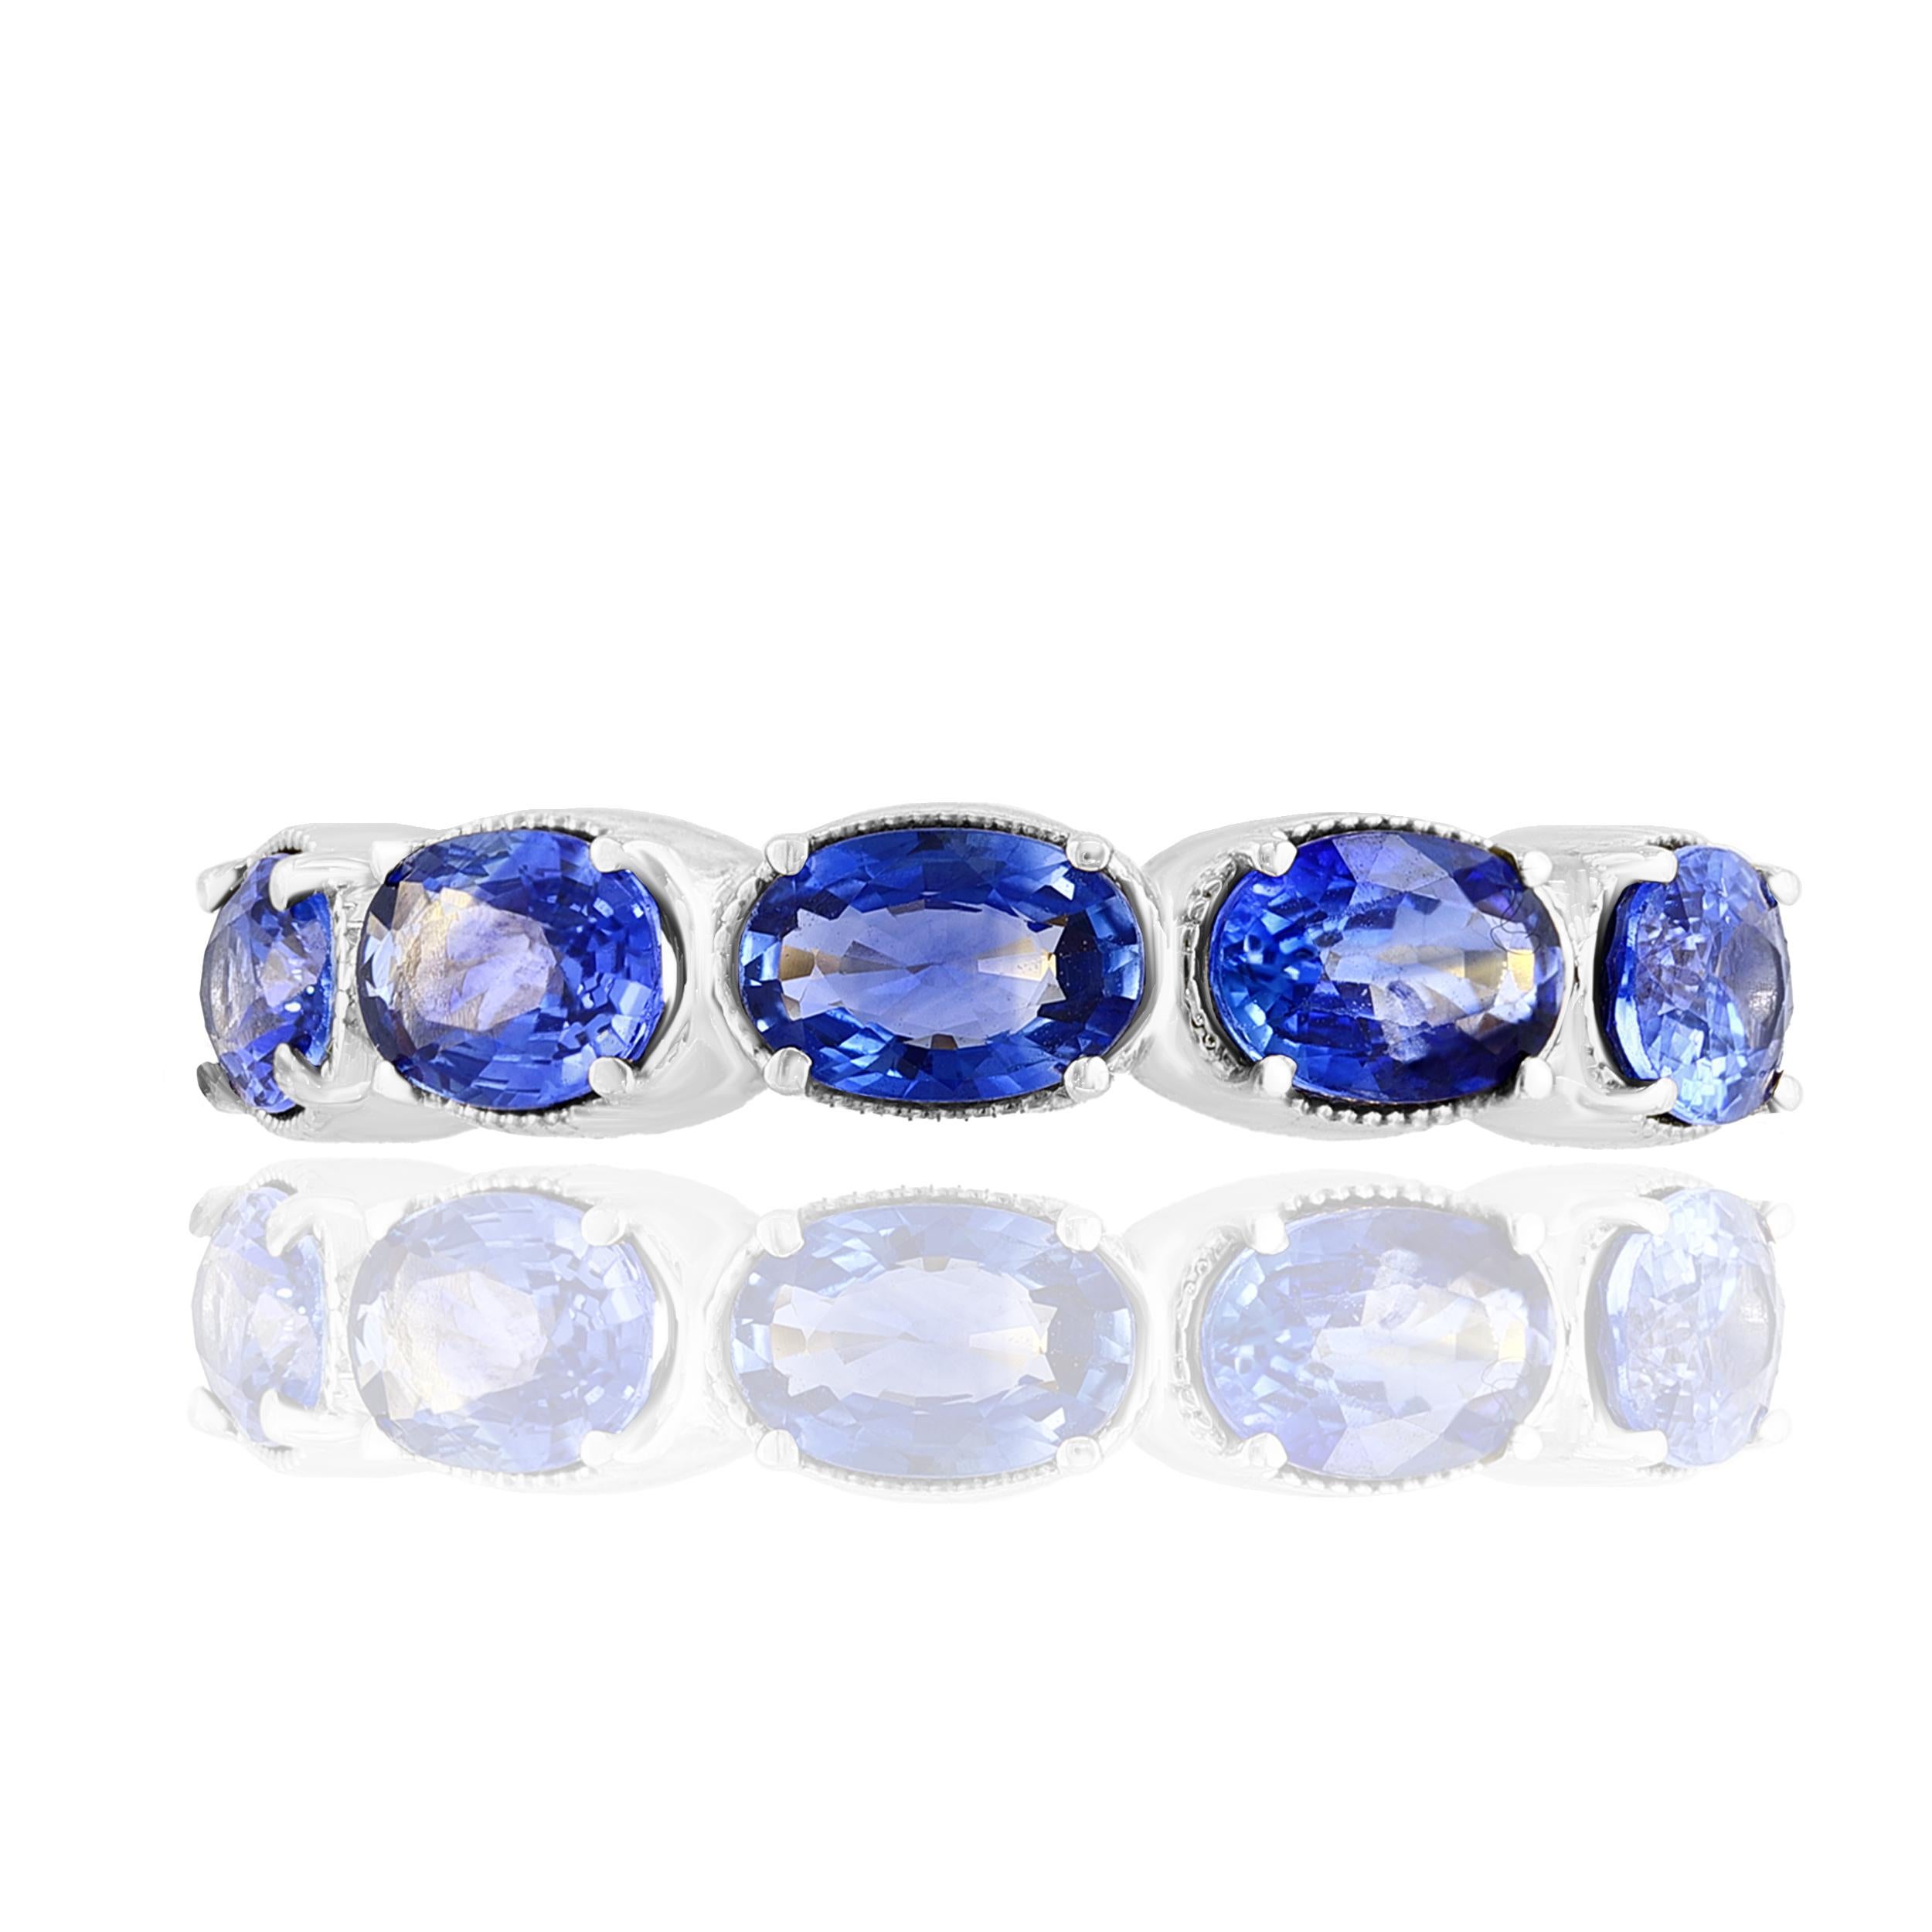 A fashionable and classic wedding band showcasing 5 color-rich blue sapphires weighing 2.76 carats total. Stones secured with a 4 prong setting made with 14 karats white gold. A versatile piece that can be worn as a fashionable right-hand ring as